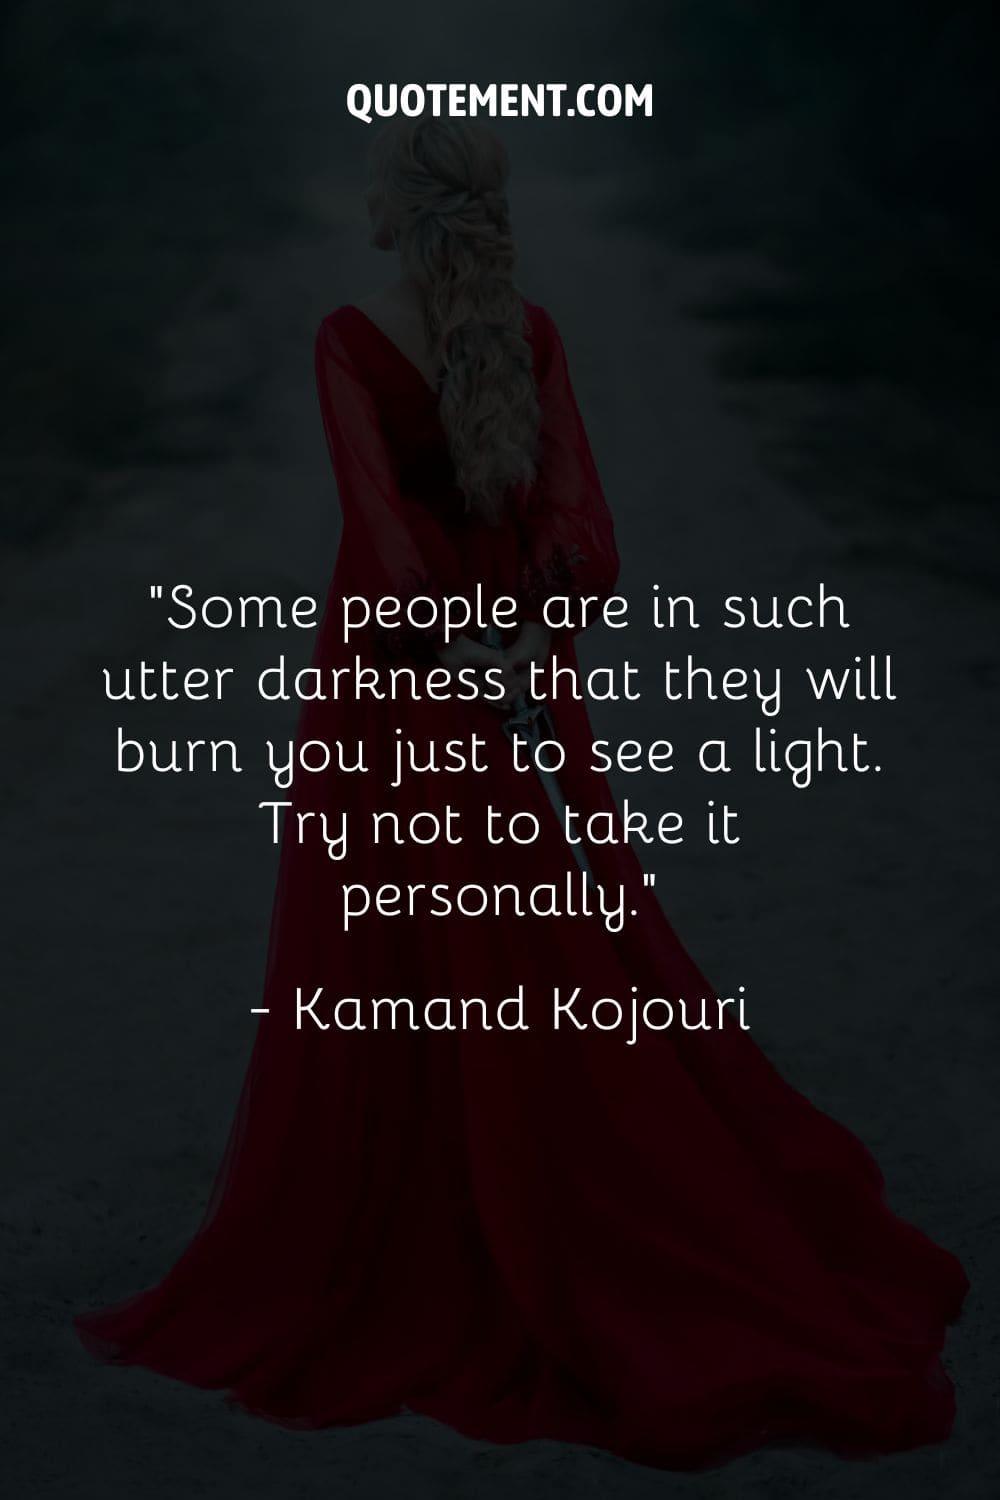 Some people are in such utter darkness that they will burn you just to see a light. Try not to take it personally.